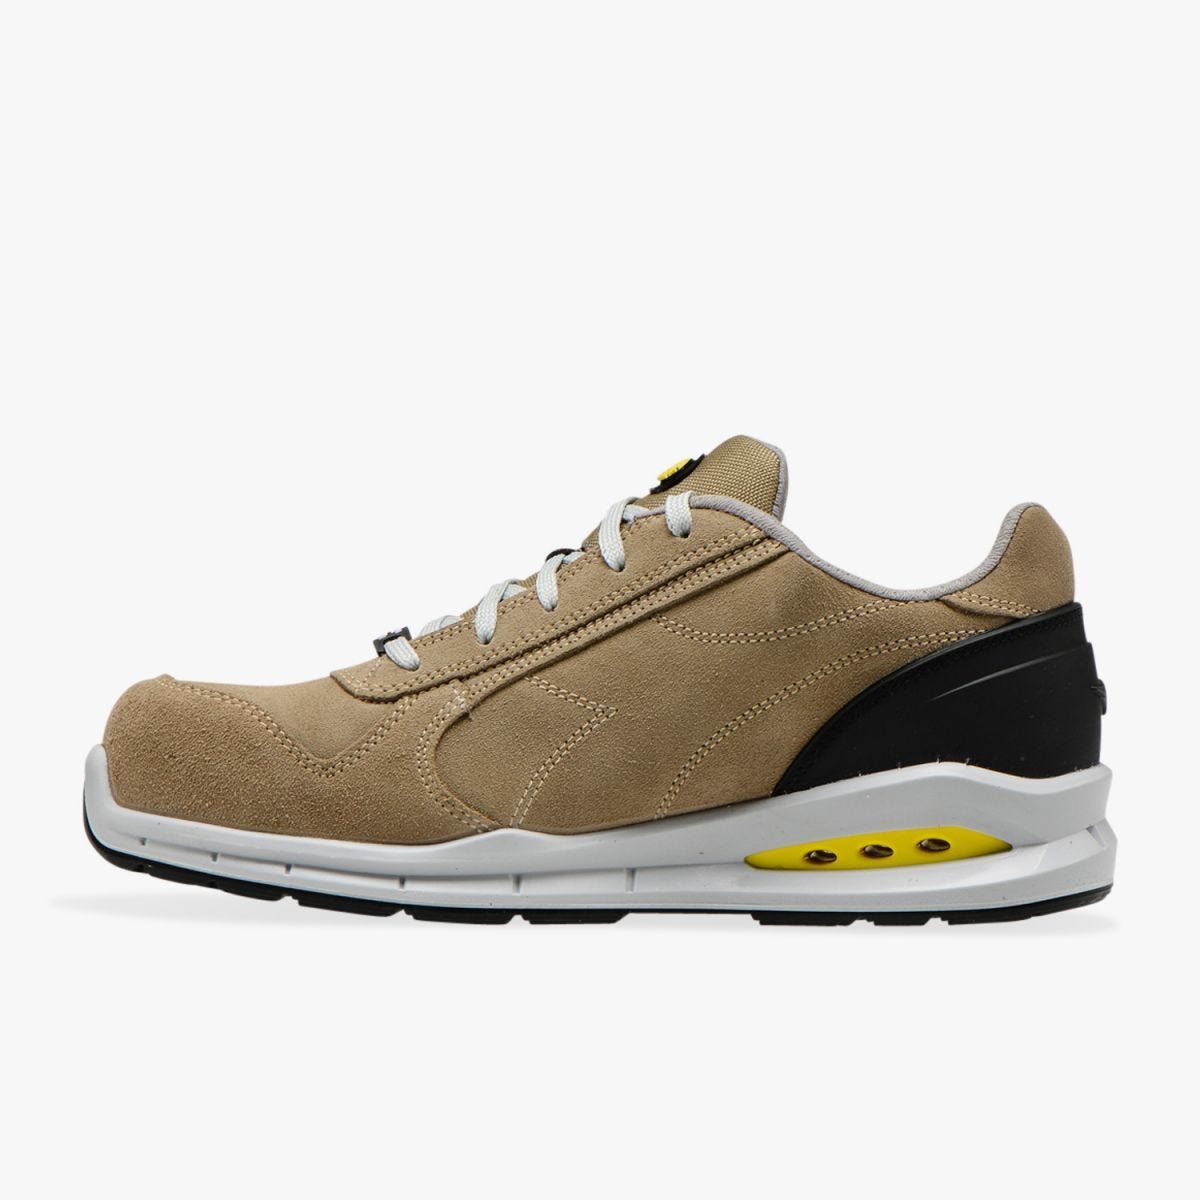 CHAUSSURE SECURITE RUN NET AIRBOX LOW S3 SRC TAUPE/TAUPE - Diadora - Taille 39 1